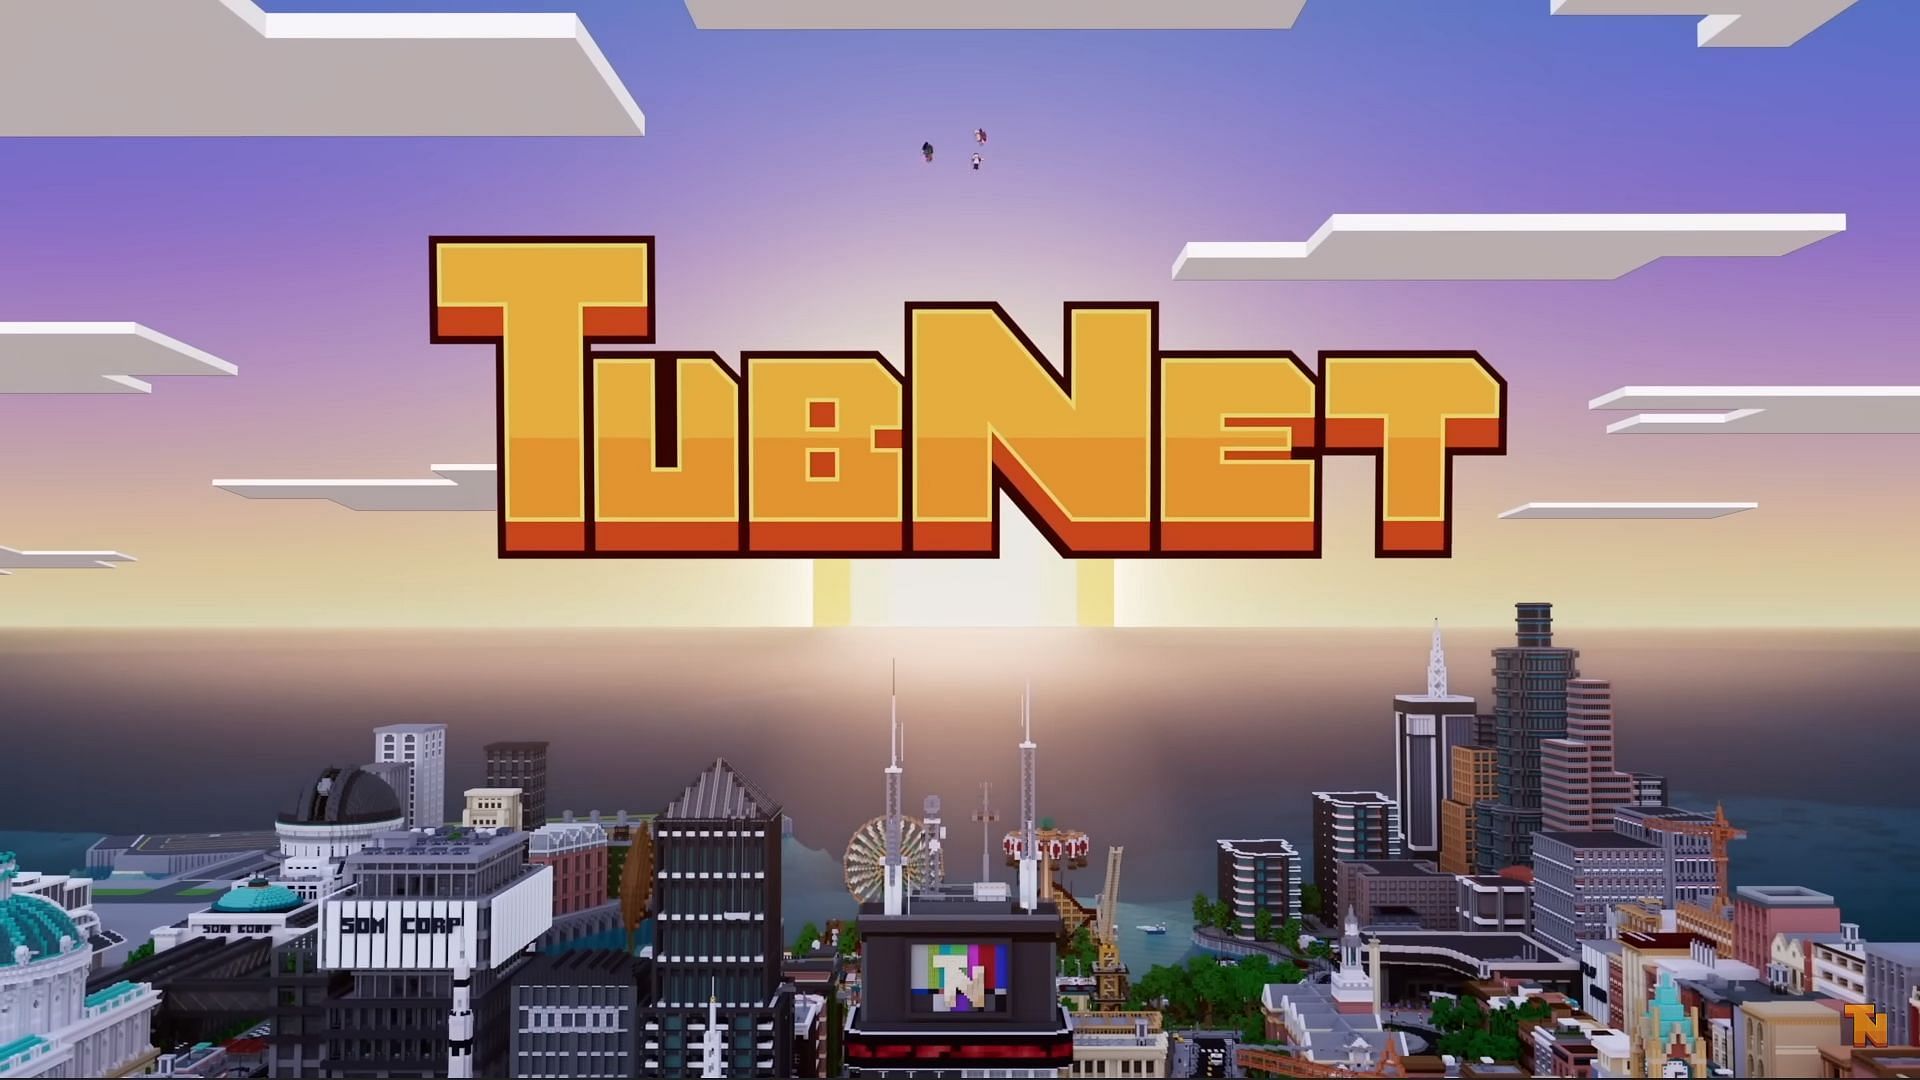 TubNet&#039;s announcement trailer has over three million views (Image via YouTube/TubNet)